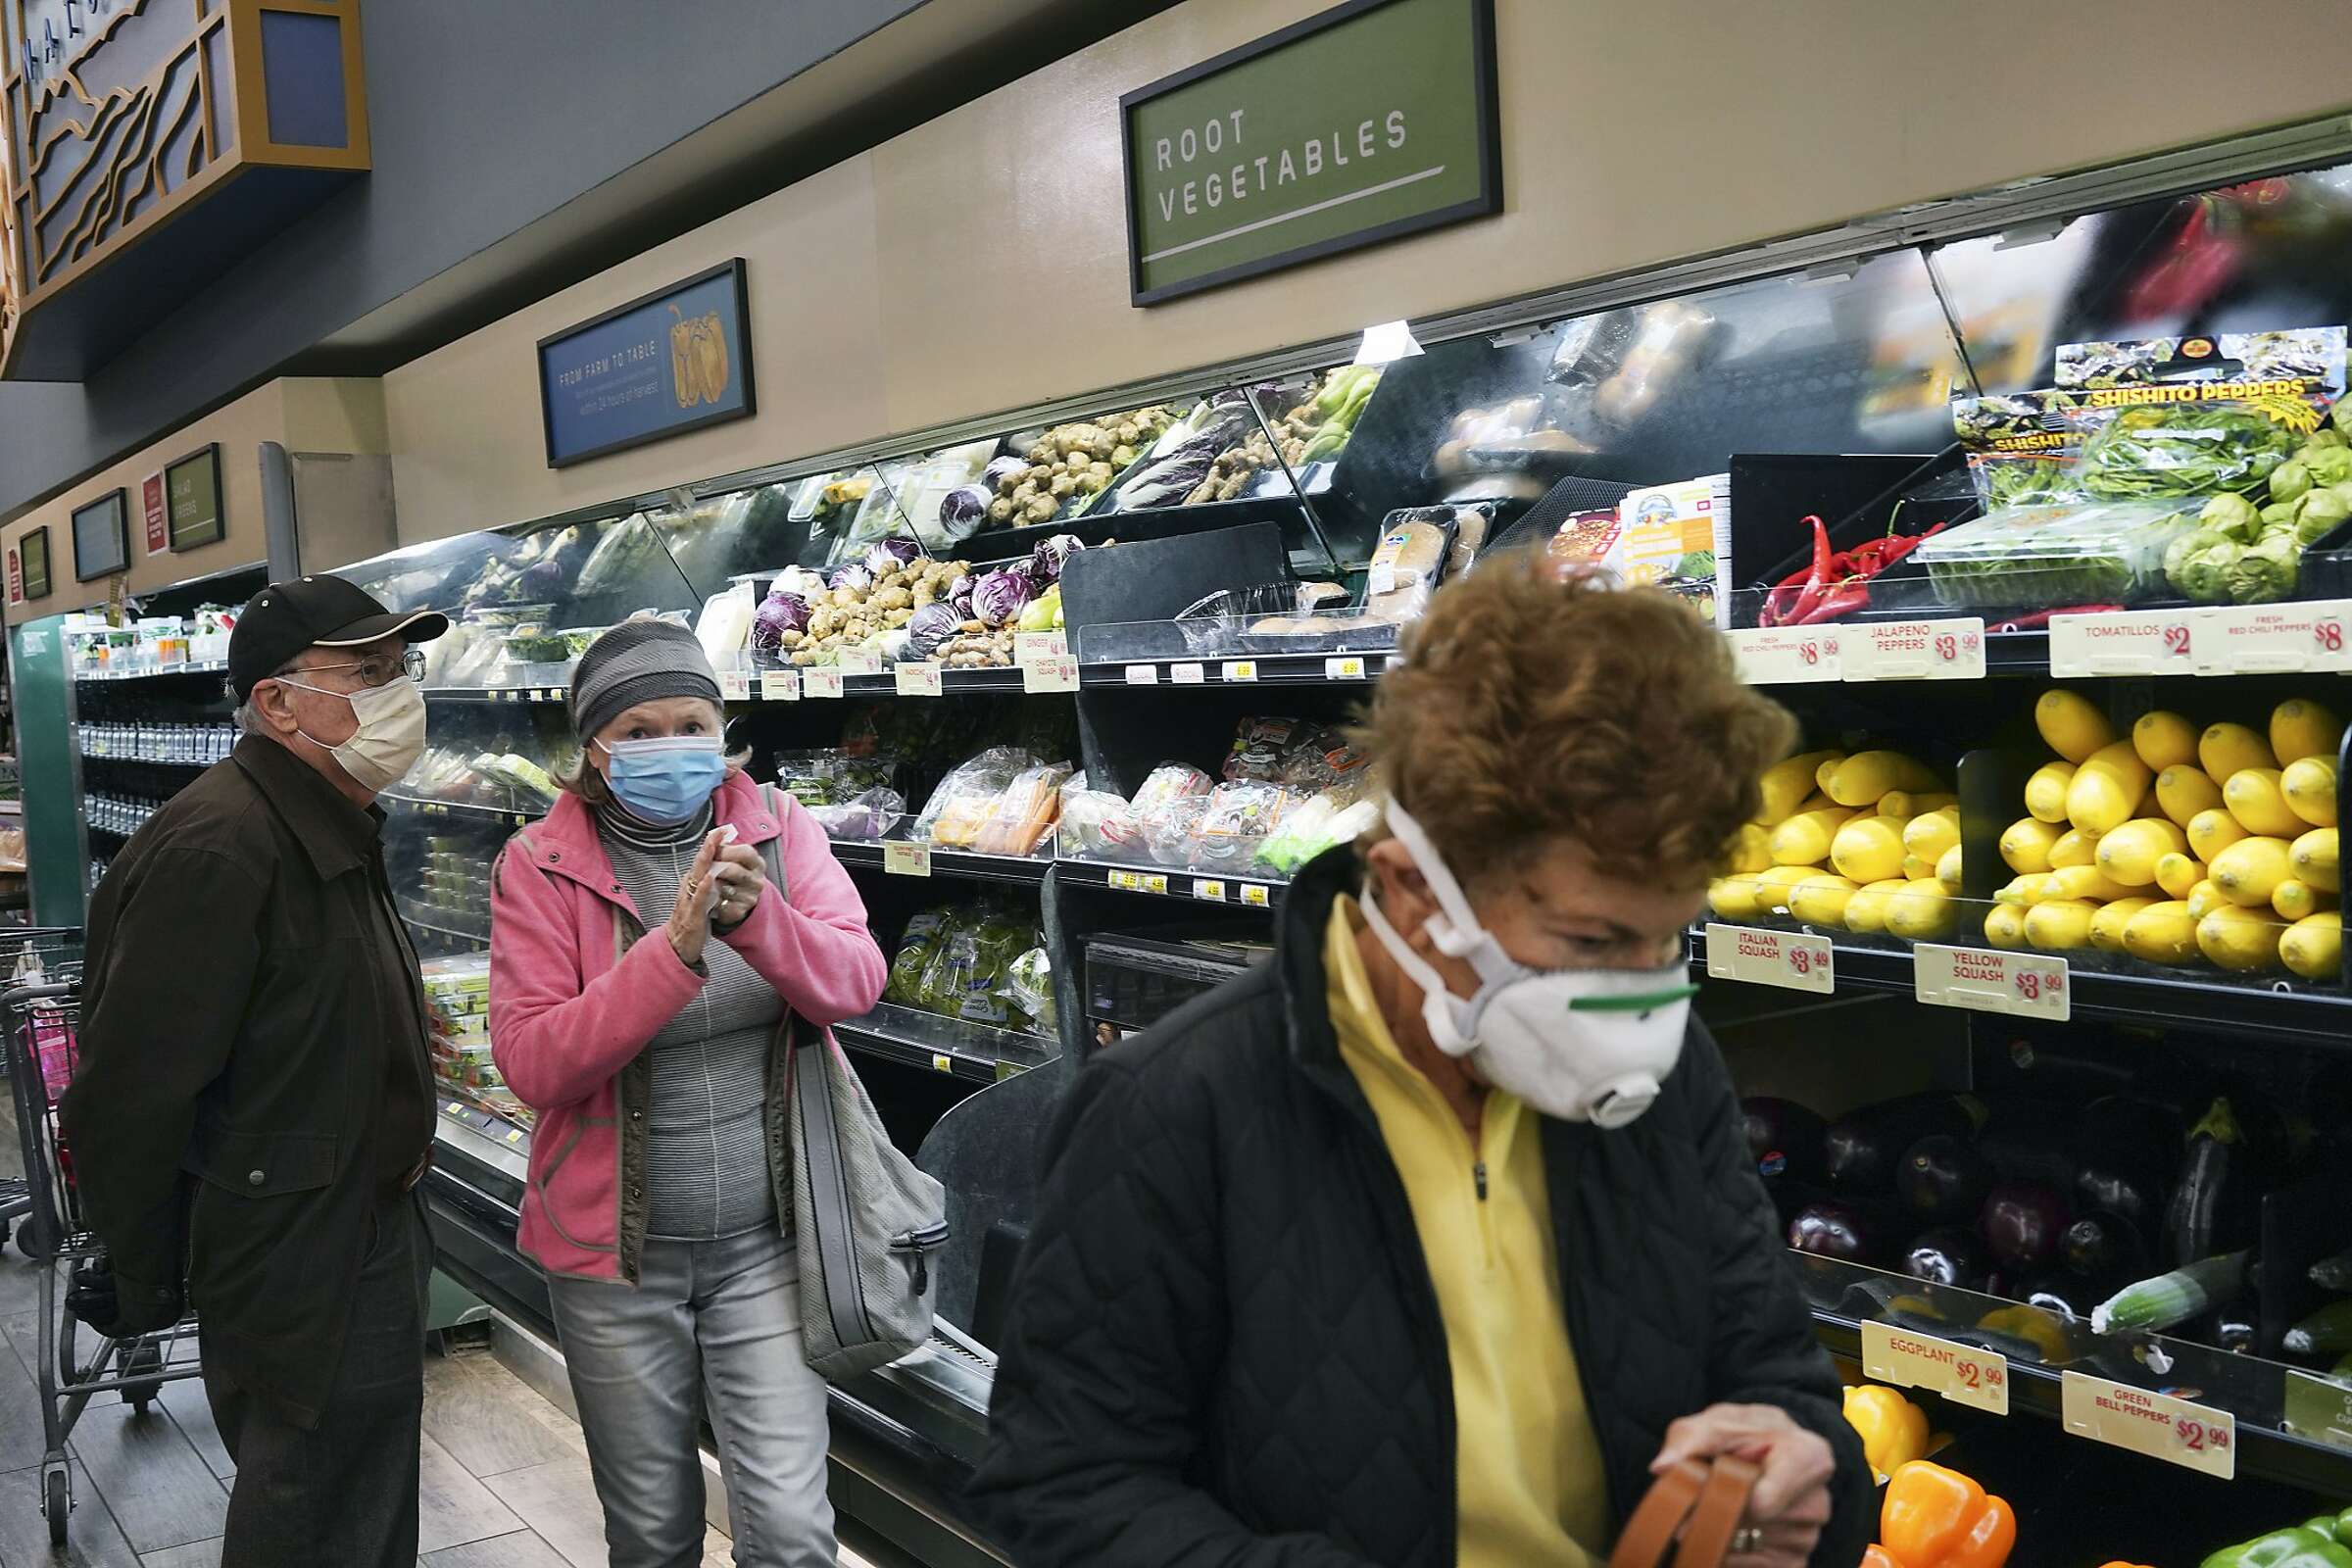 California will wait until June 15 to lift indoor mask mandate for vaccinated people
